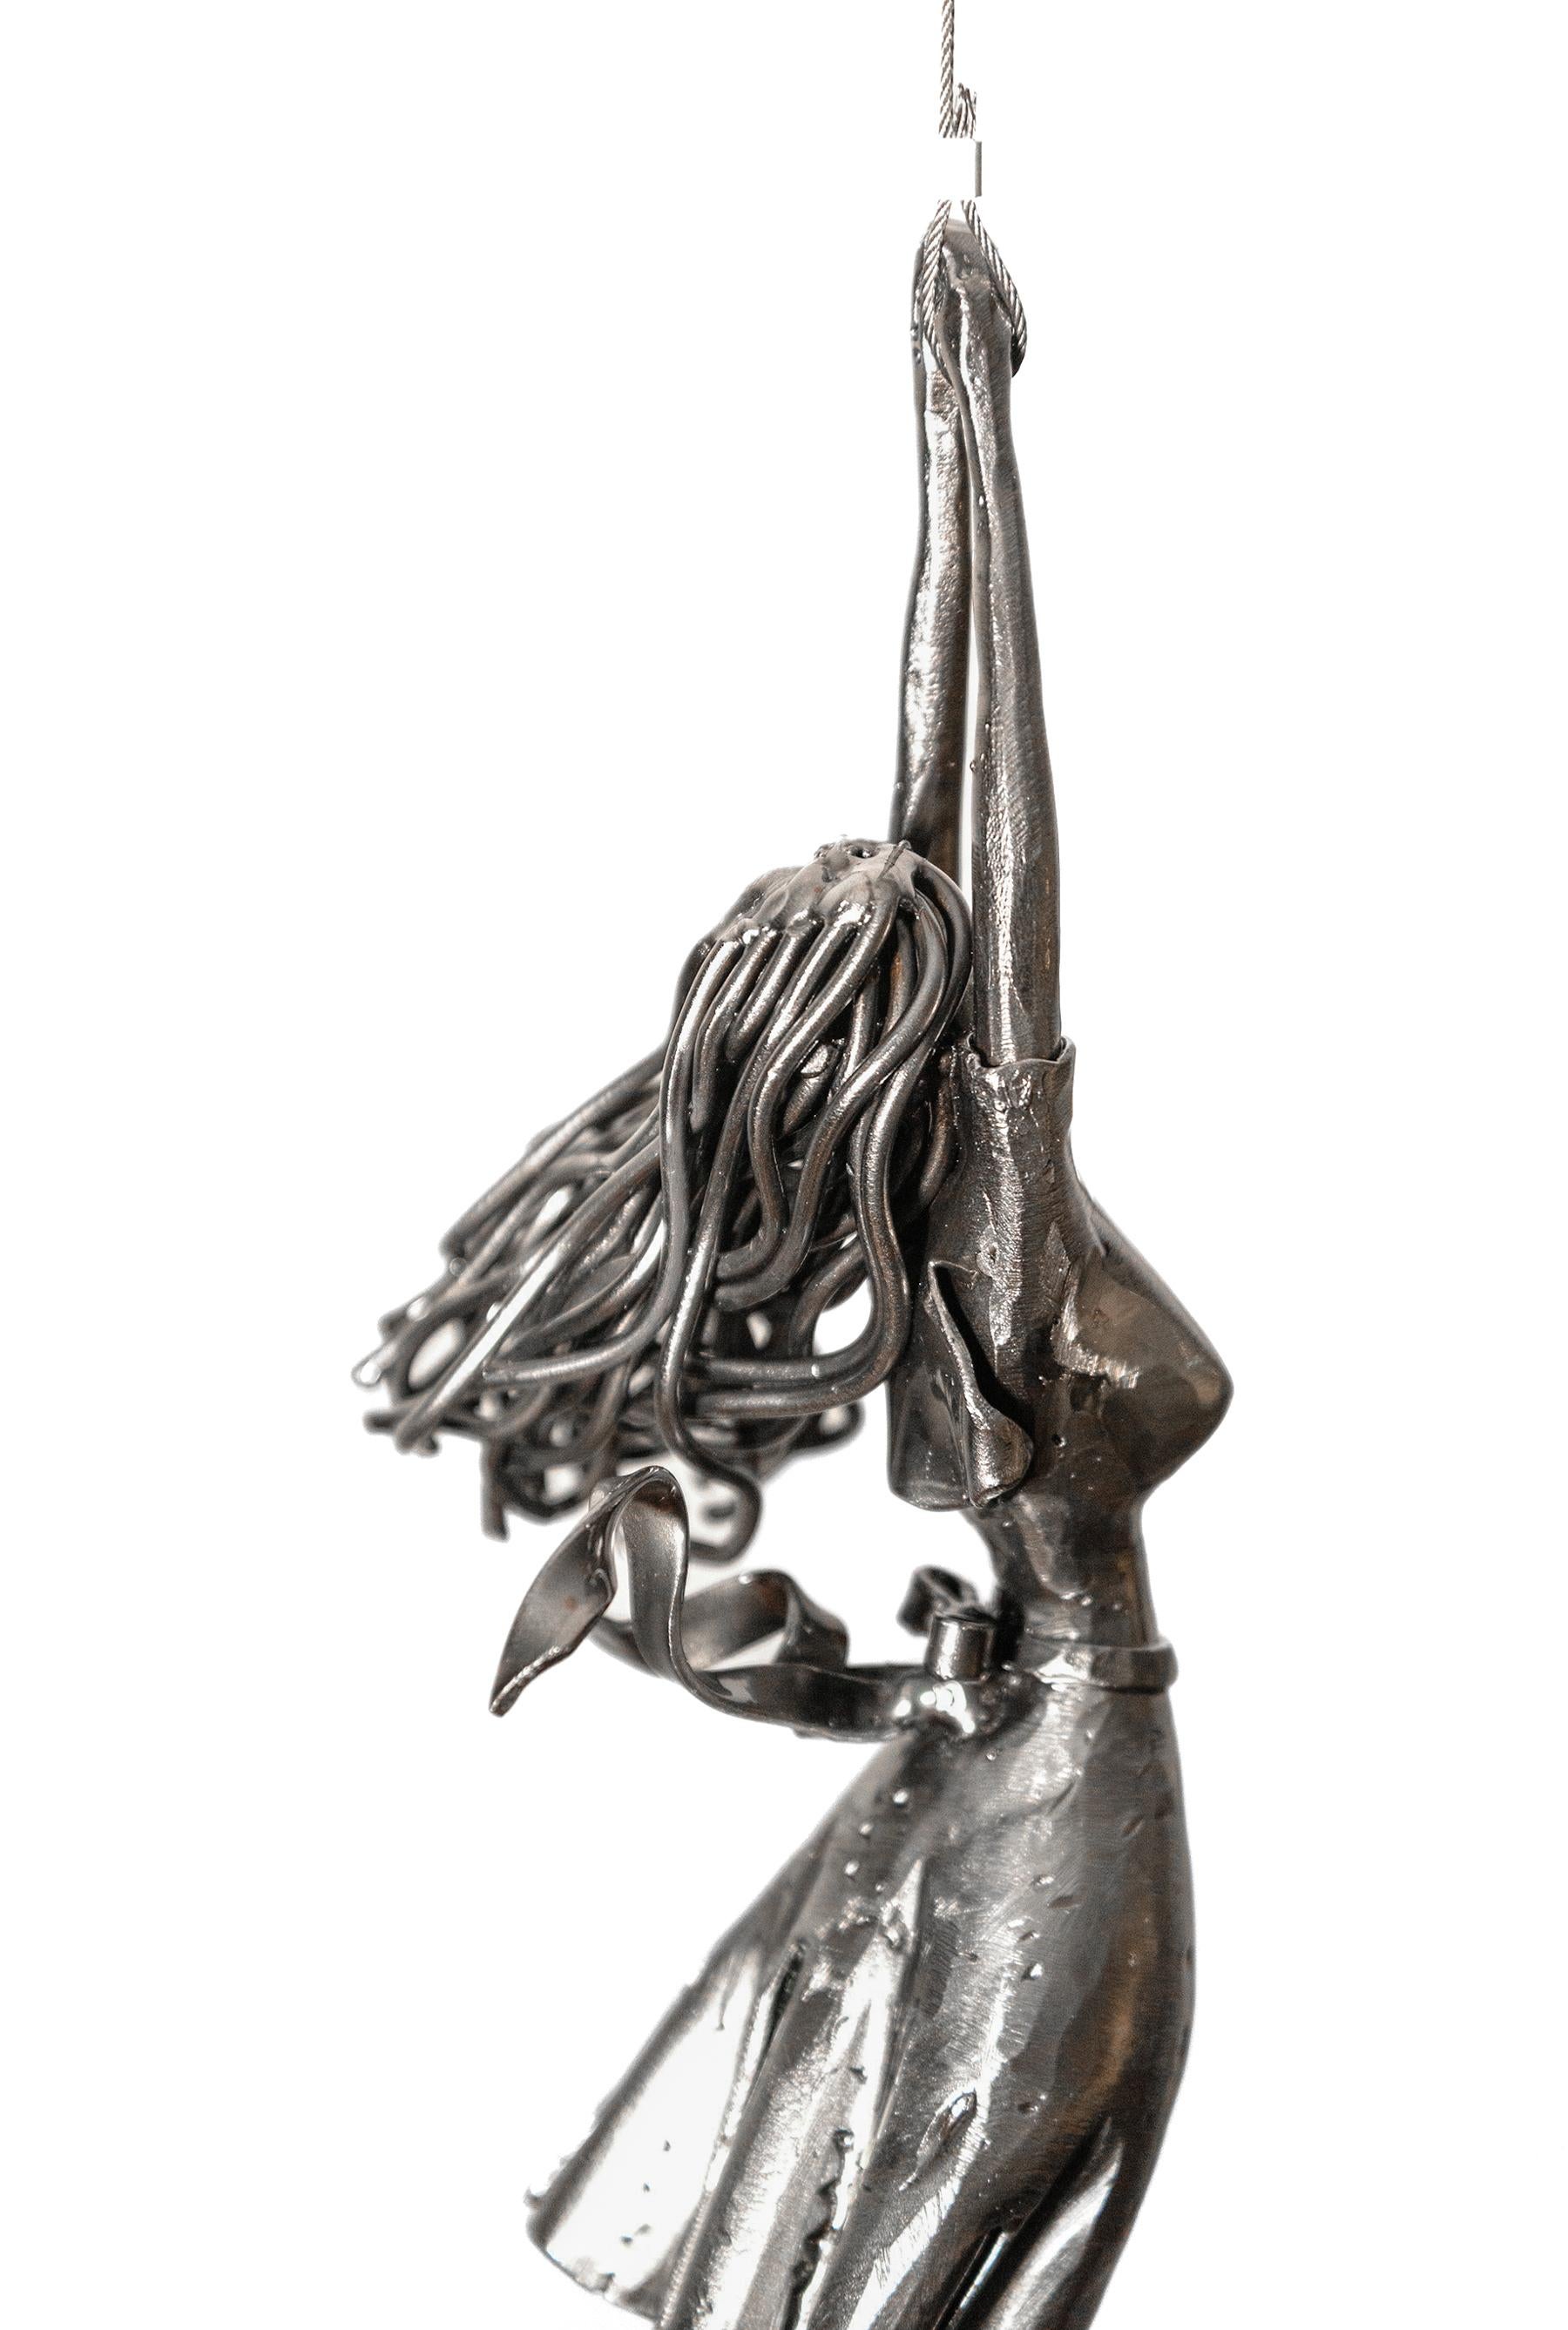 Let it Go - figurative, red balloon, female, hand-hammered steel sculpture 2